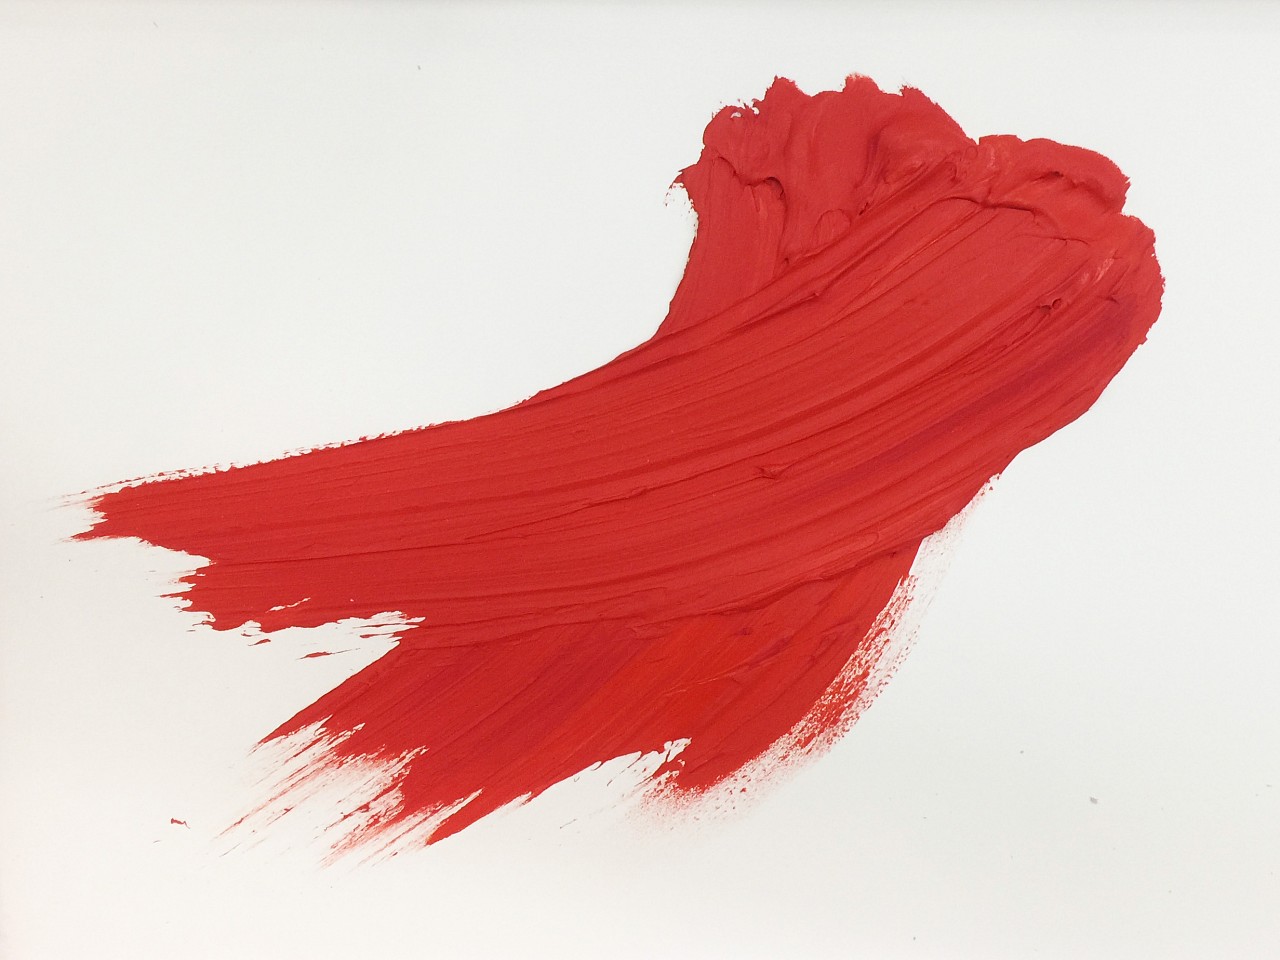 Donald Martiny, Untitled, 2017
polymer and pigment on paper
red
MART0038